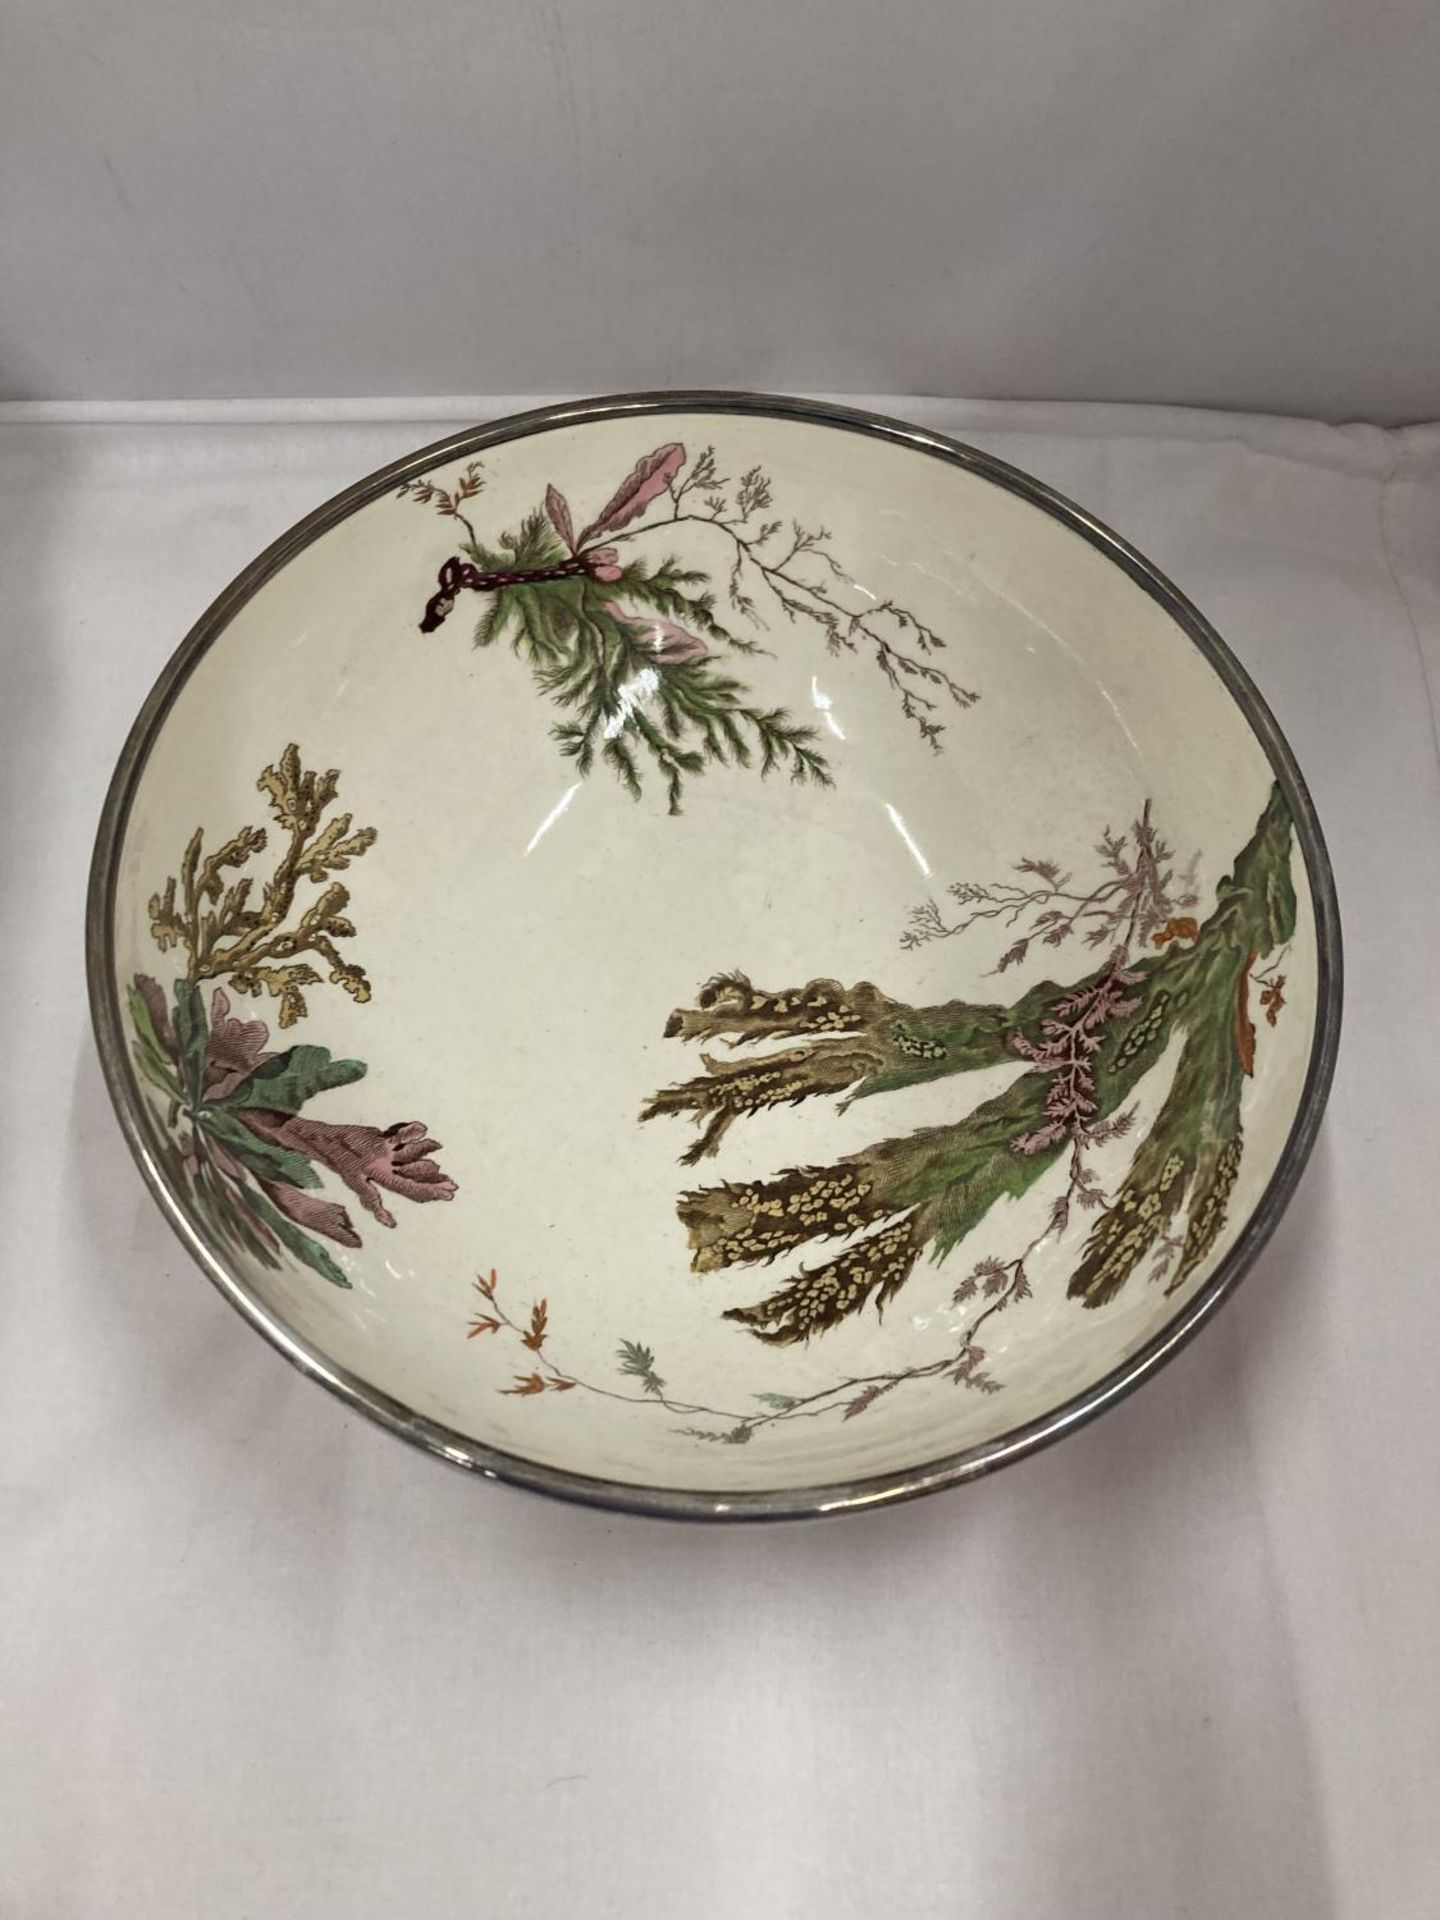 A VICTORIAN WEDGWOOD MAJOLICA SALAD BOWL WITH LOBSTER FEET AND MATCHING SILVER PLATED SERVERS - Image 3 of 7